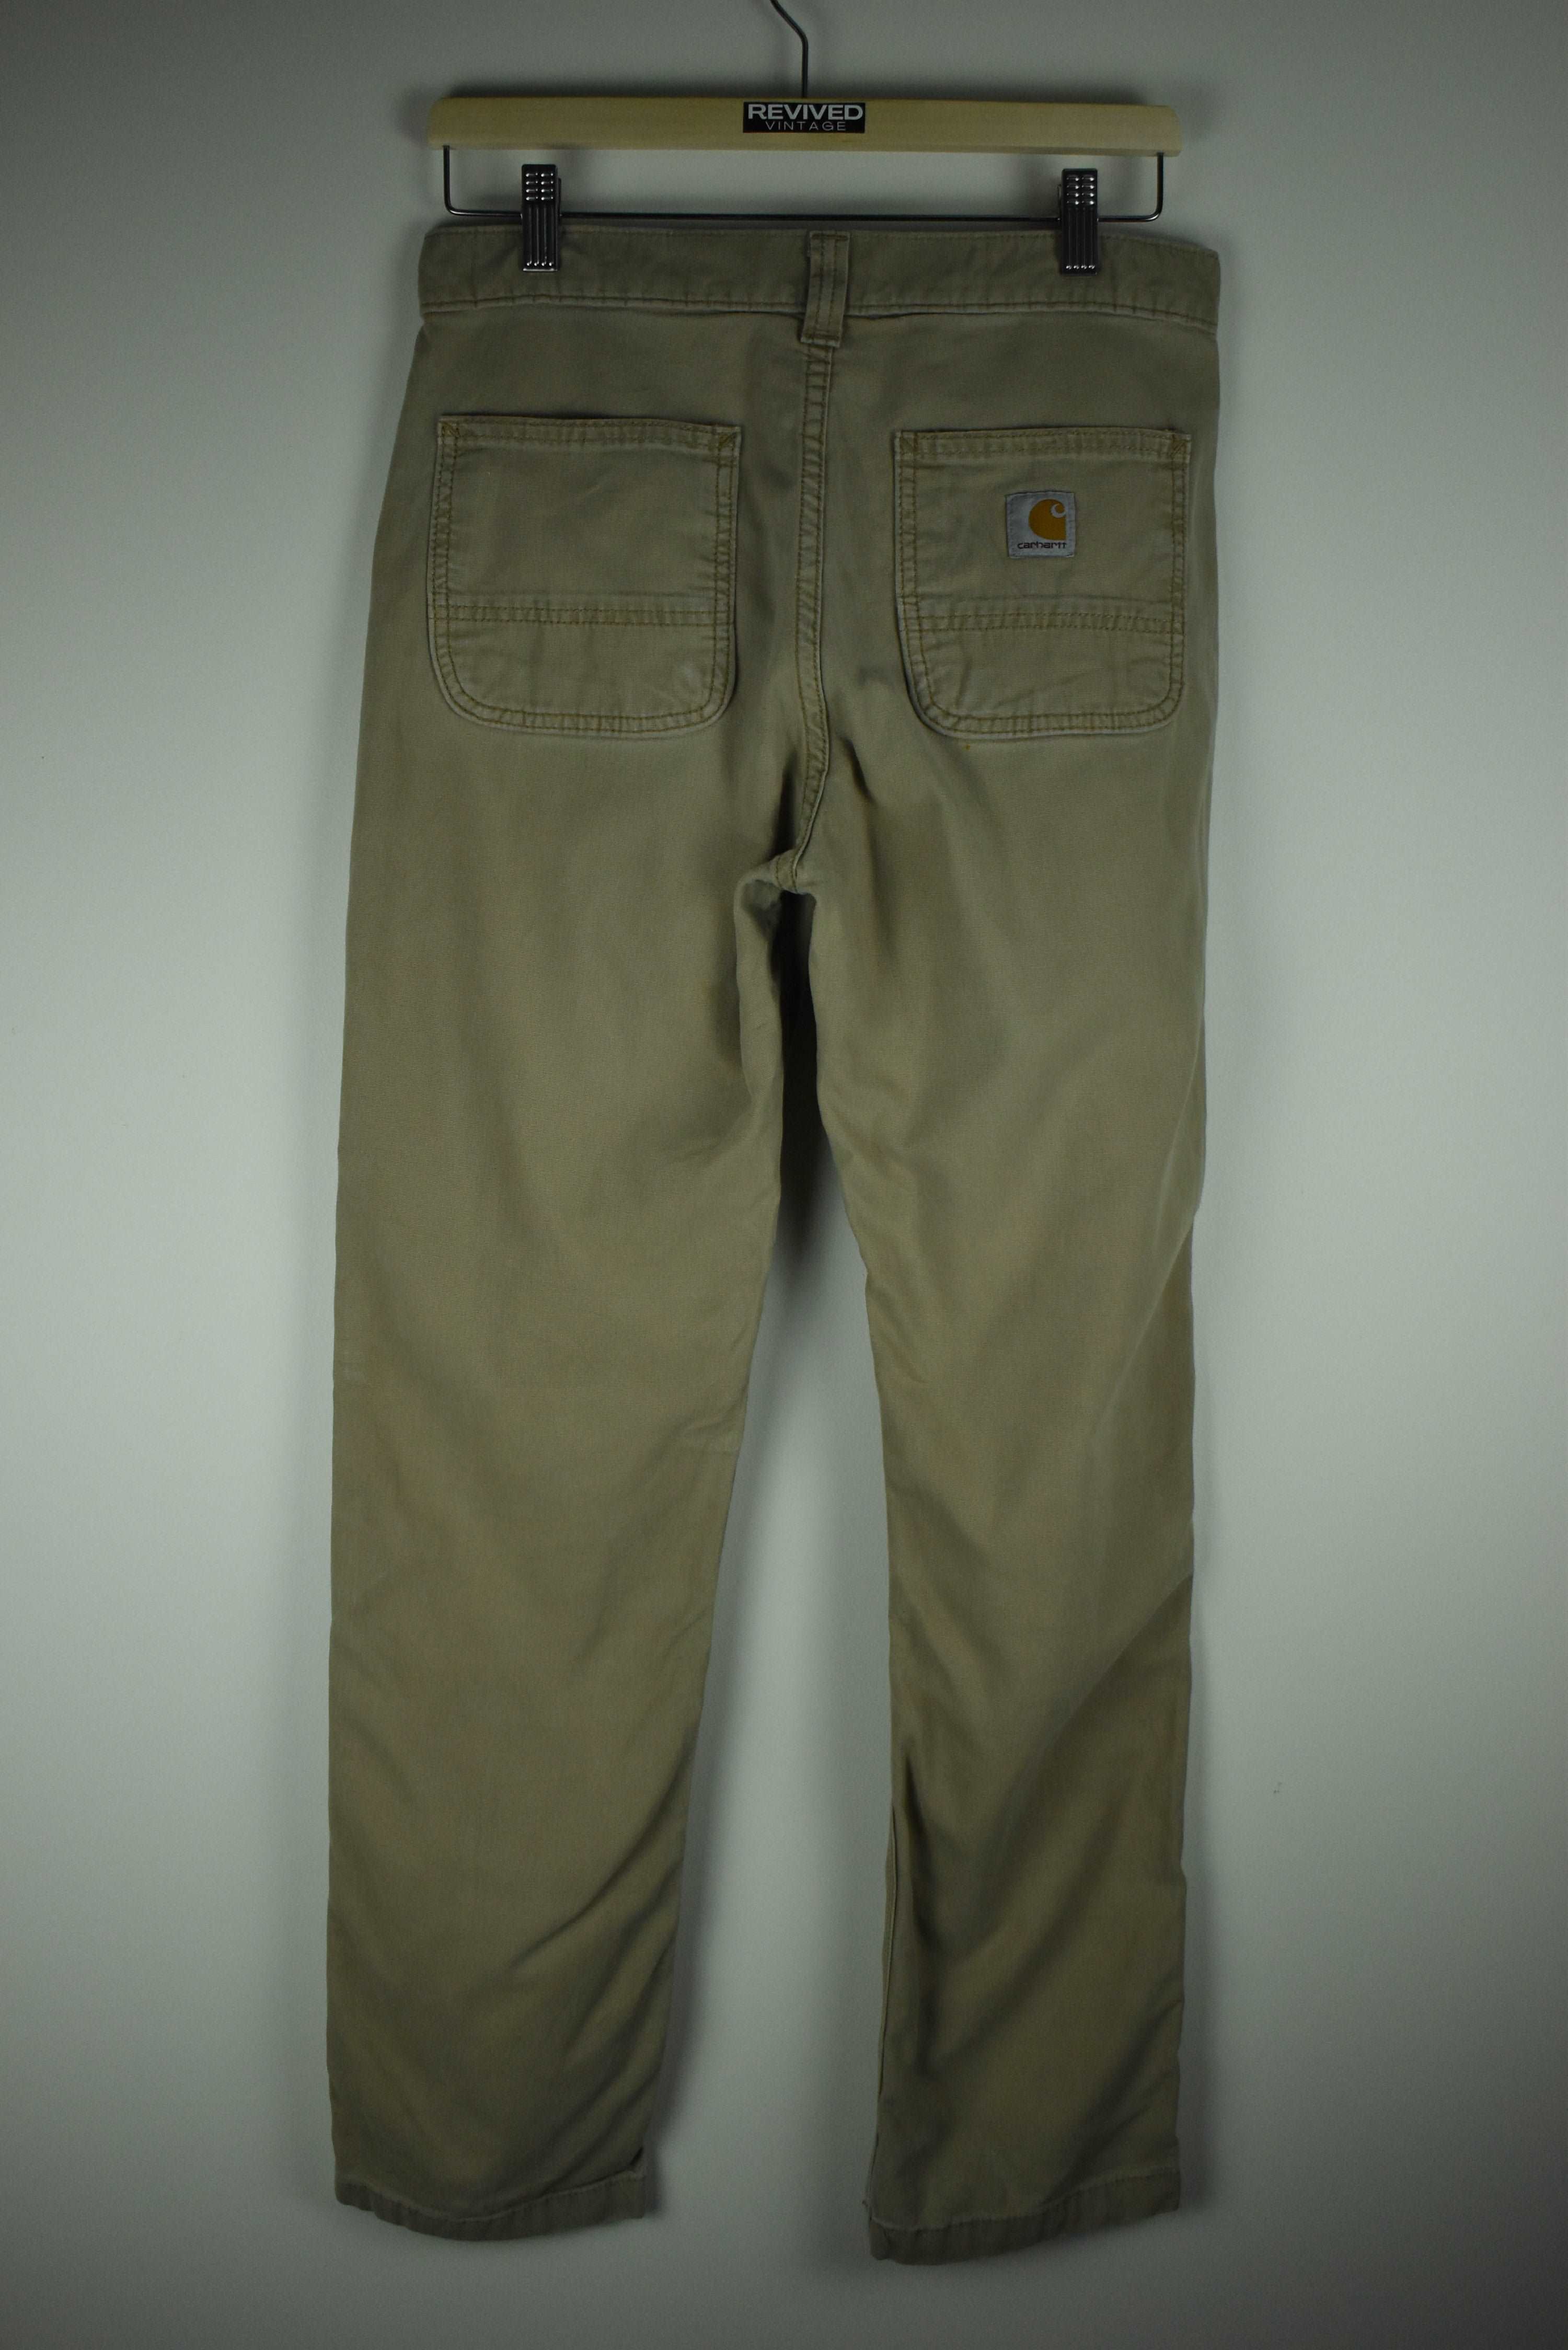 Vintage Carhartt Jeans Straight Fit 30 x 30